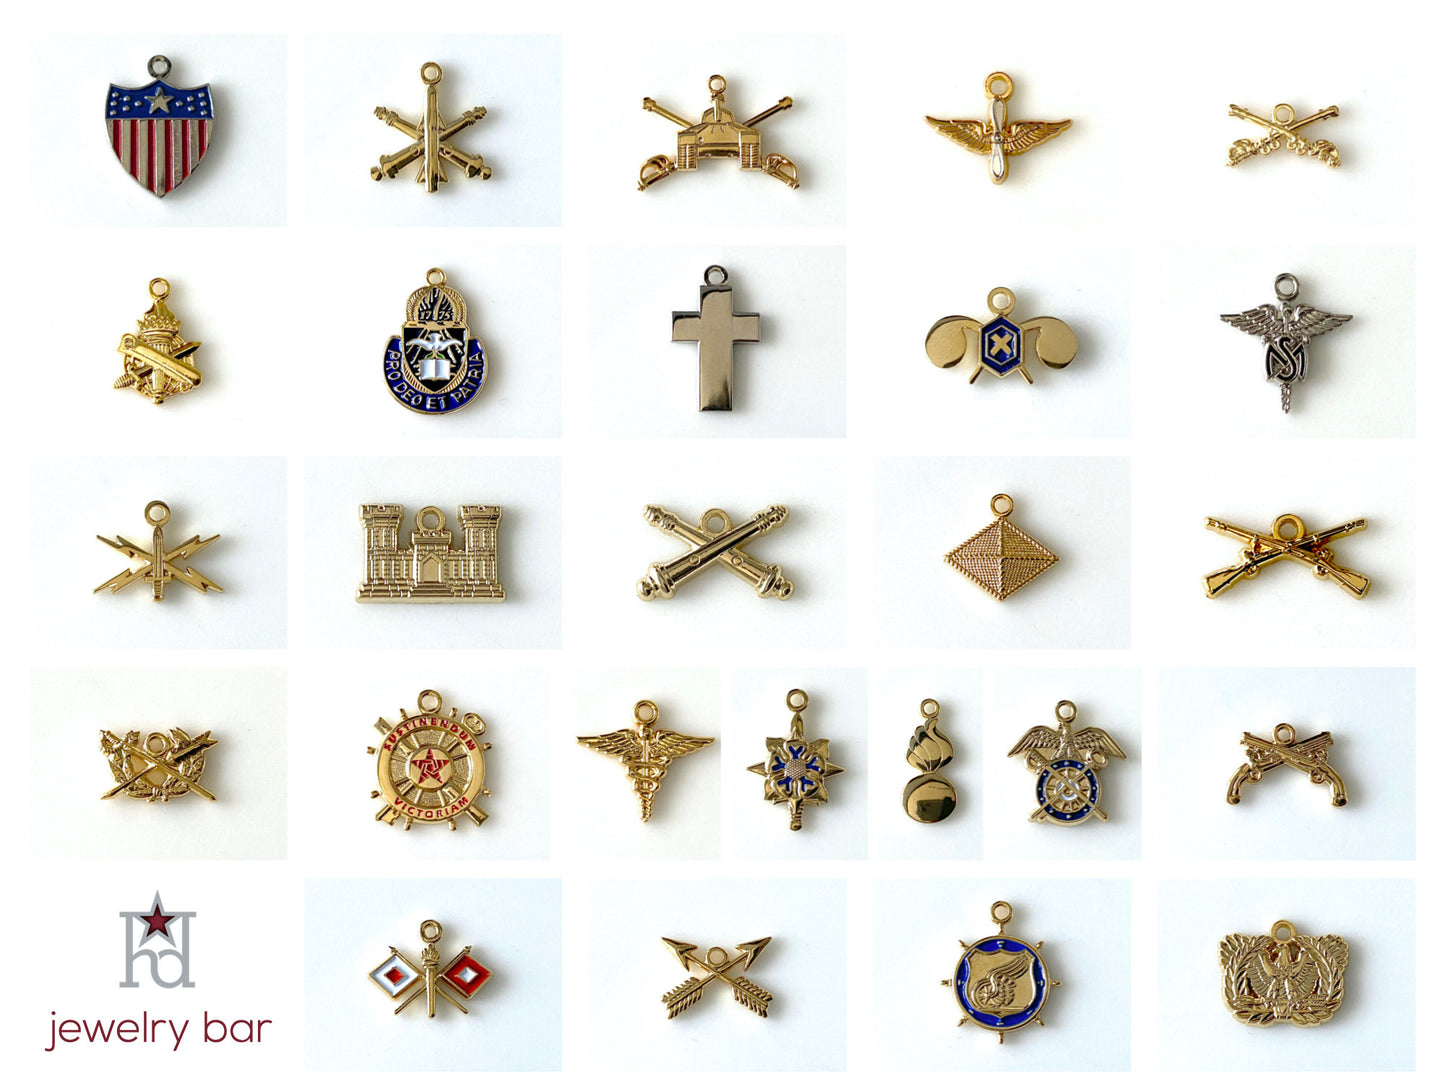 Jewelry Bar | Judge Advocate General's Corps (JAG) - Army Branch Charm